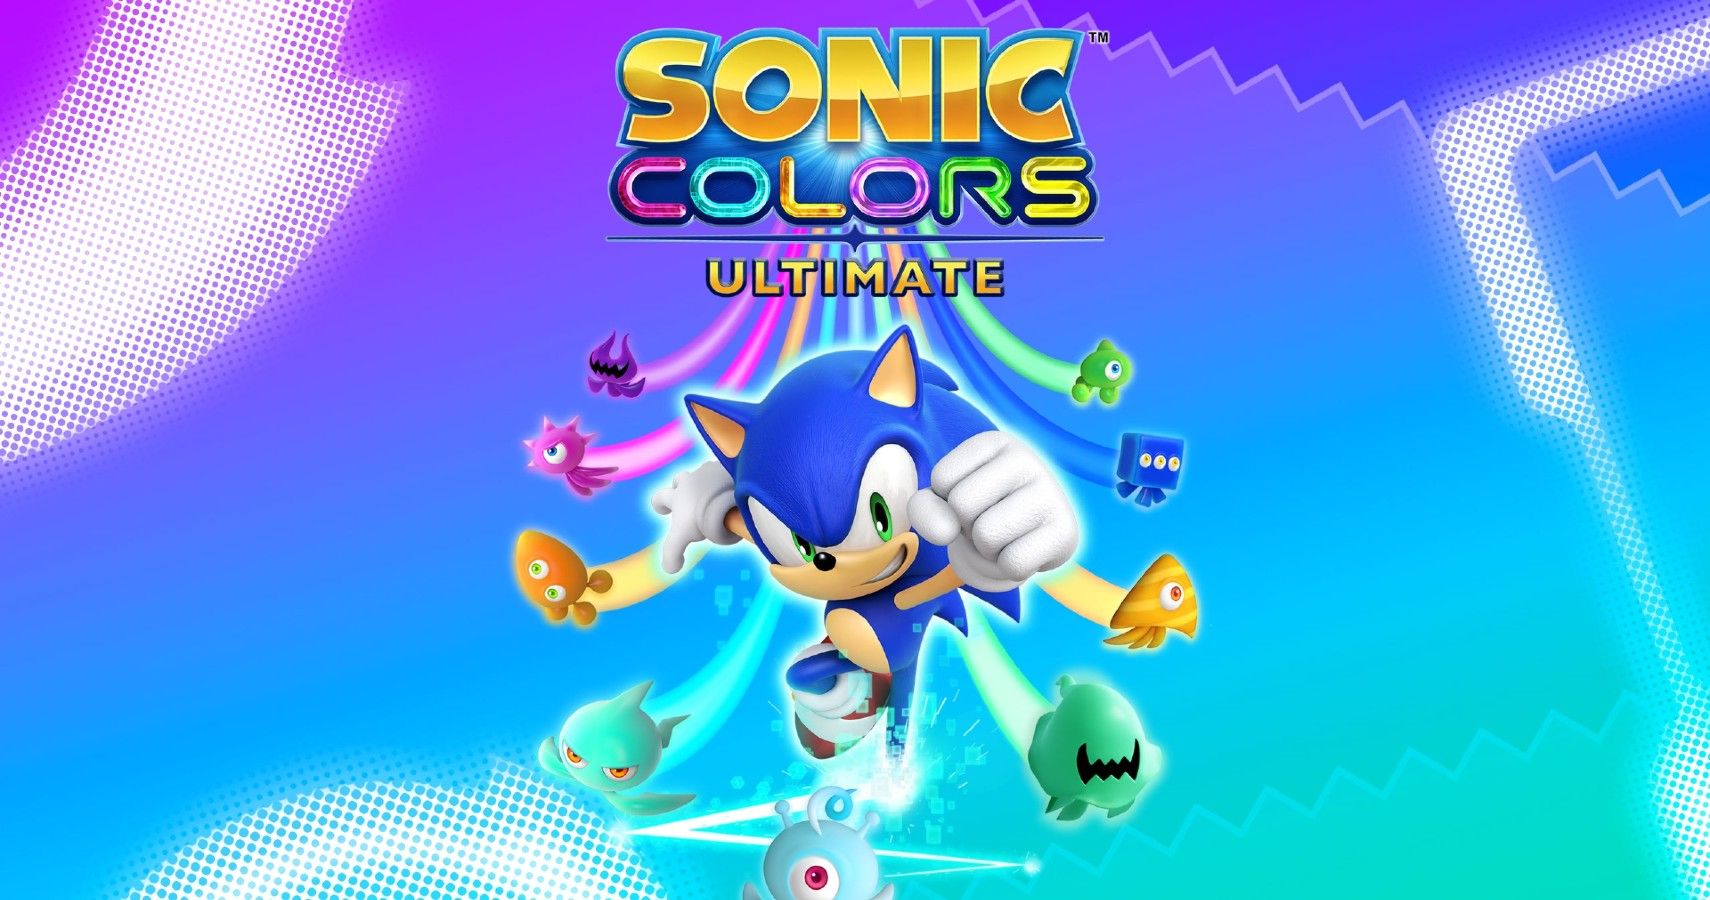 Sonic Colors Ultimate Wasnt The Remaster I Expected But Im Glad Its Coming